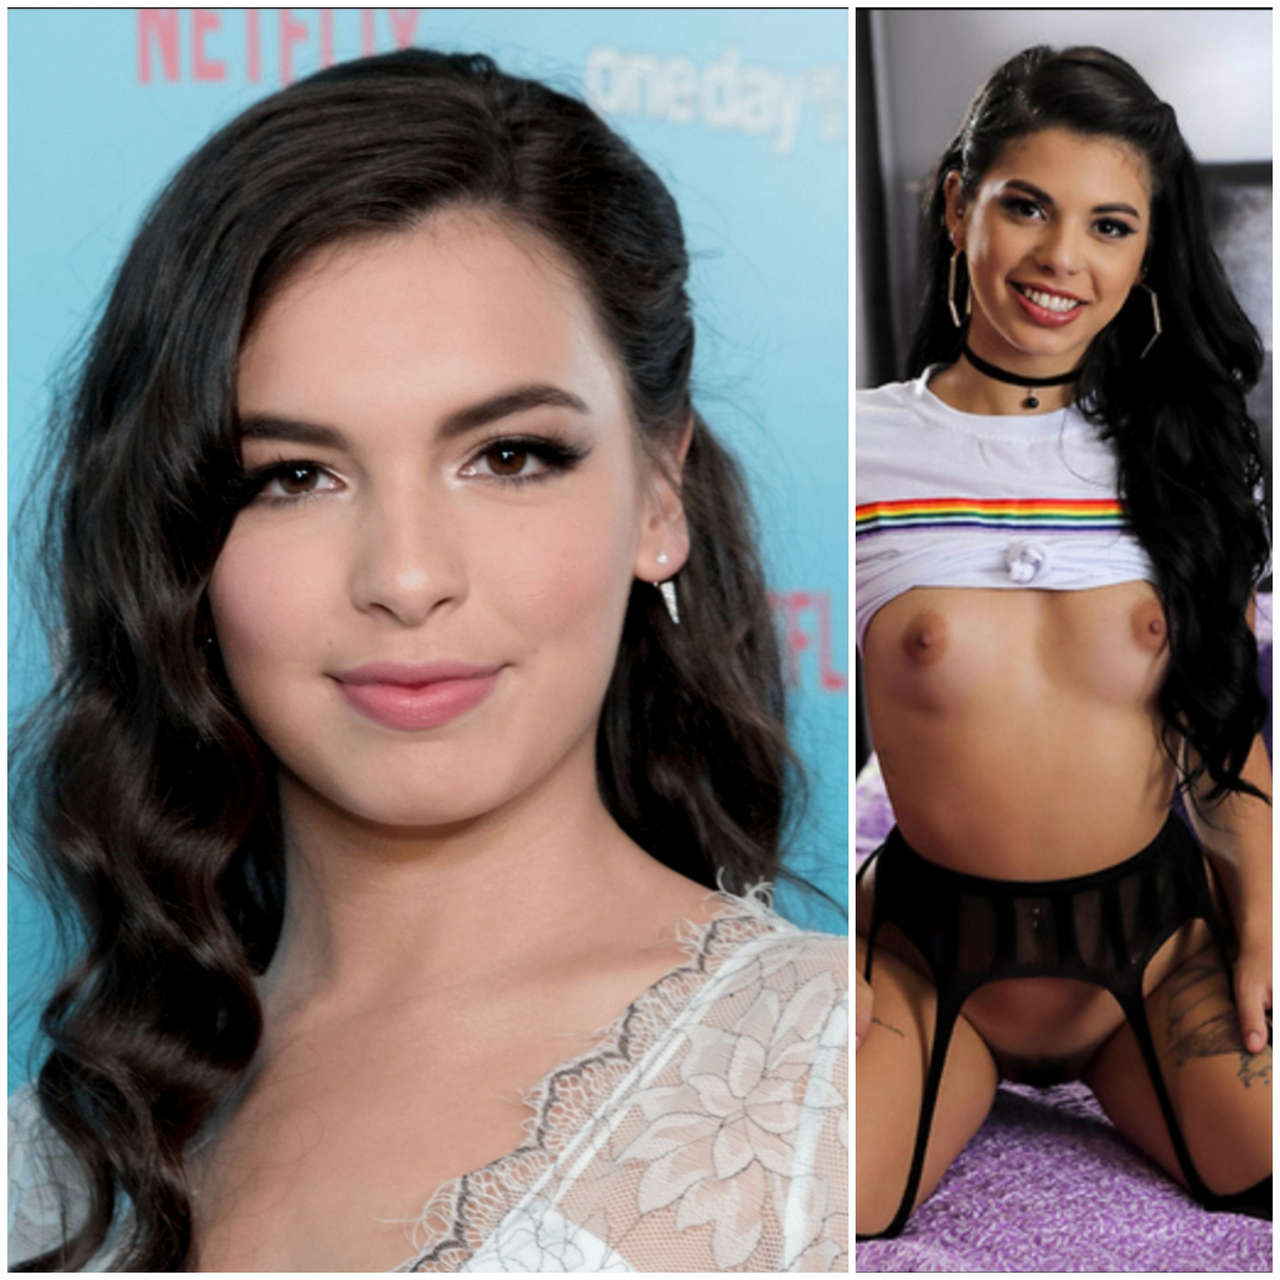 Is It Just Me Or Does Isabella Gomez One Day At A Time Look Like Gina Valentina NSFW